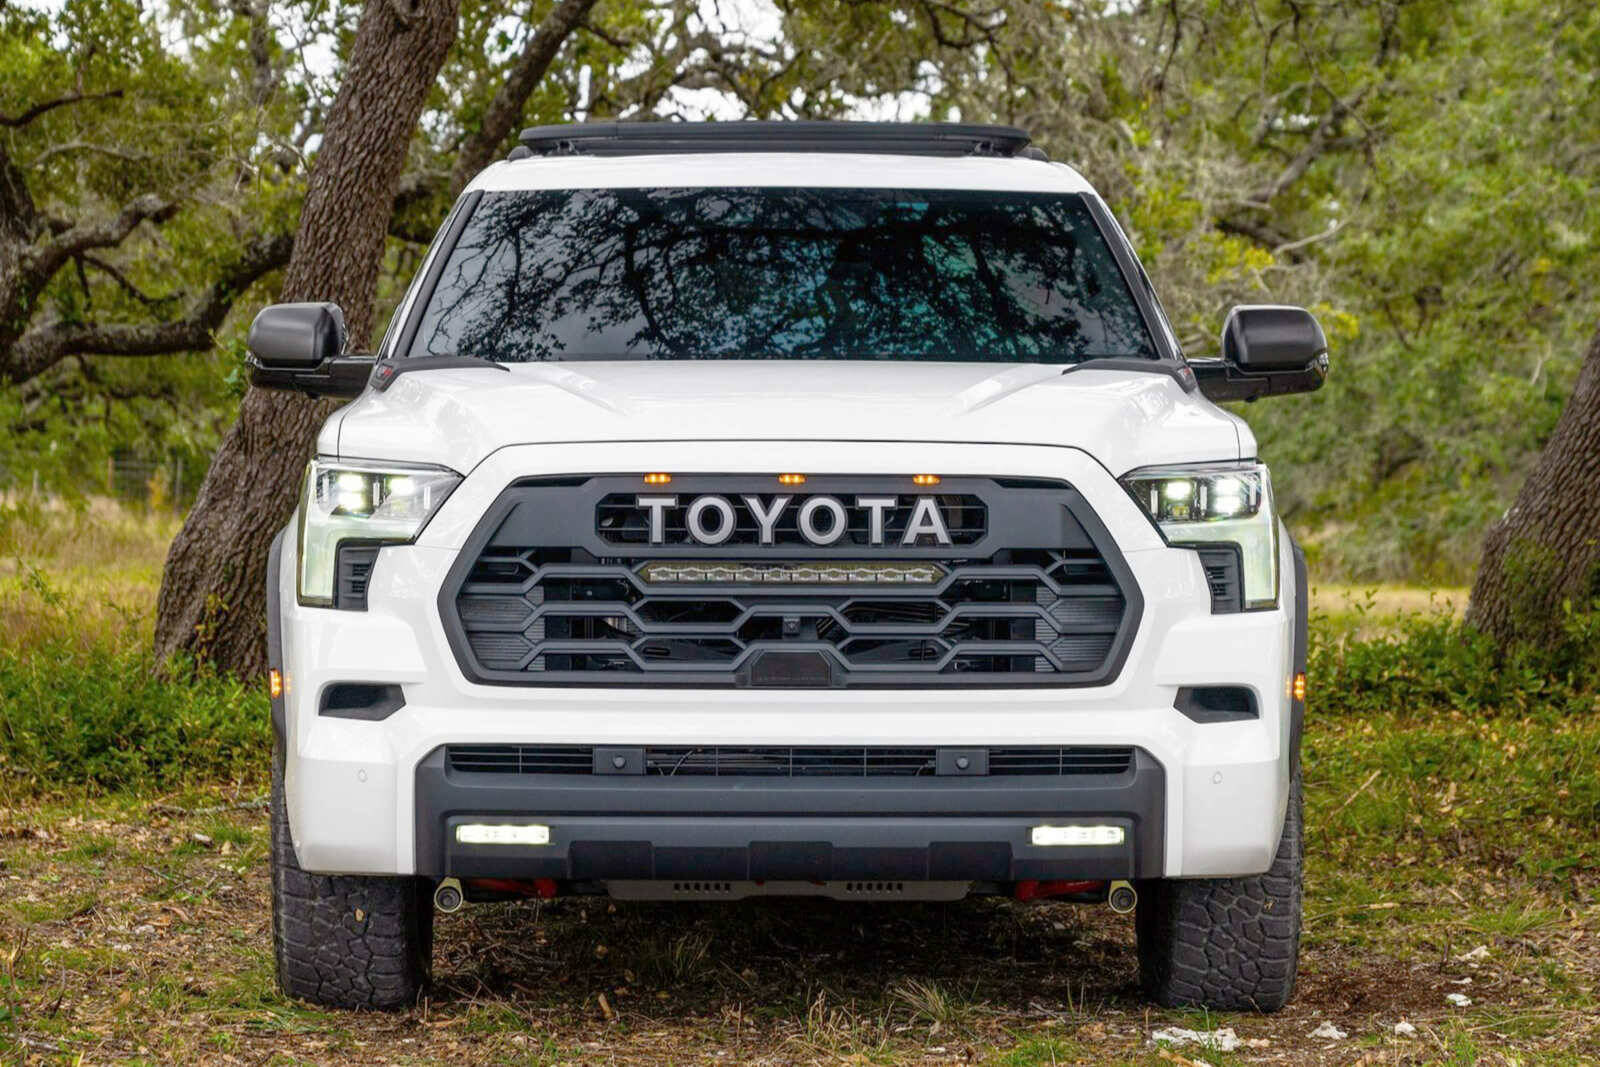 The Toyota Sequoia’s overall dimensions have increased for 2023, which translates into more passenger and cargo space. PHOTO: TOYOTA